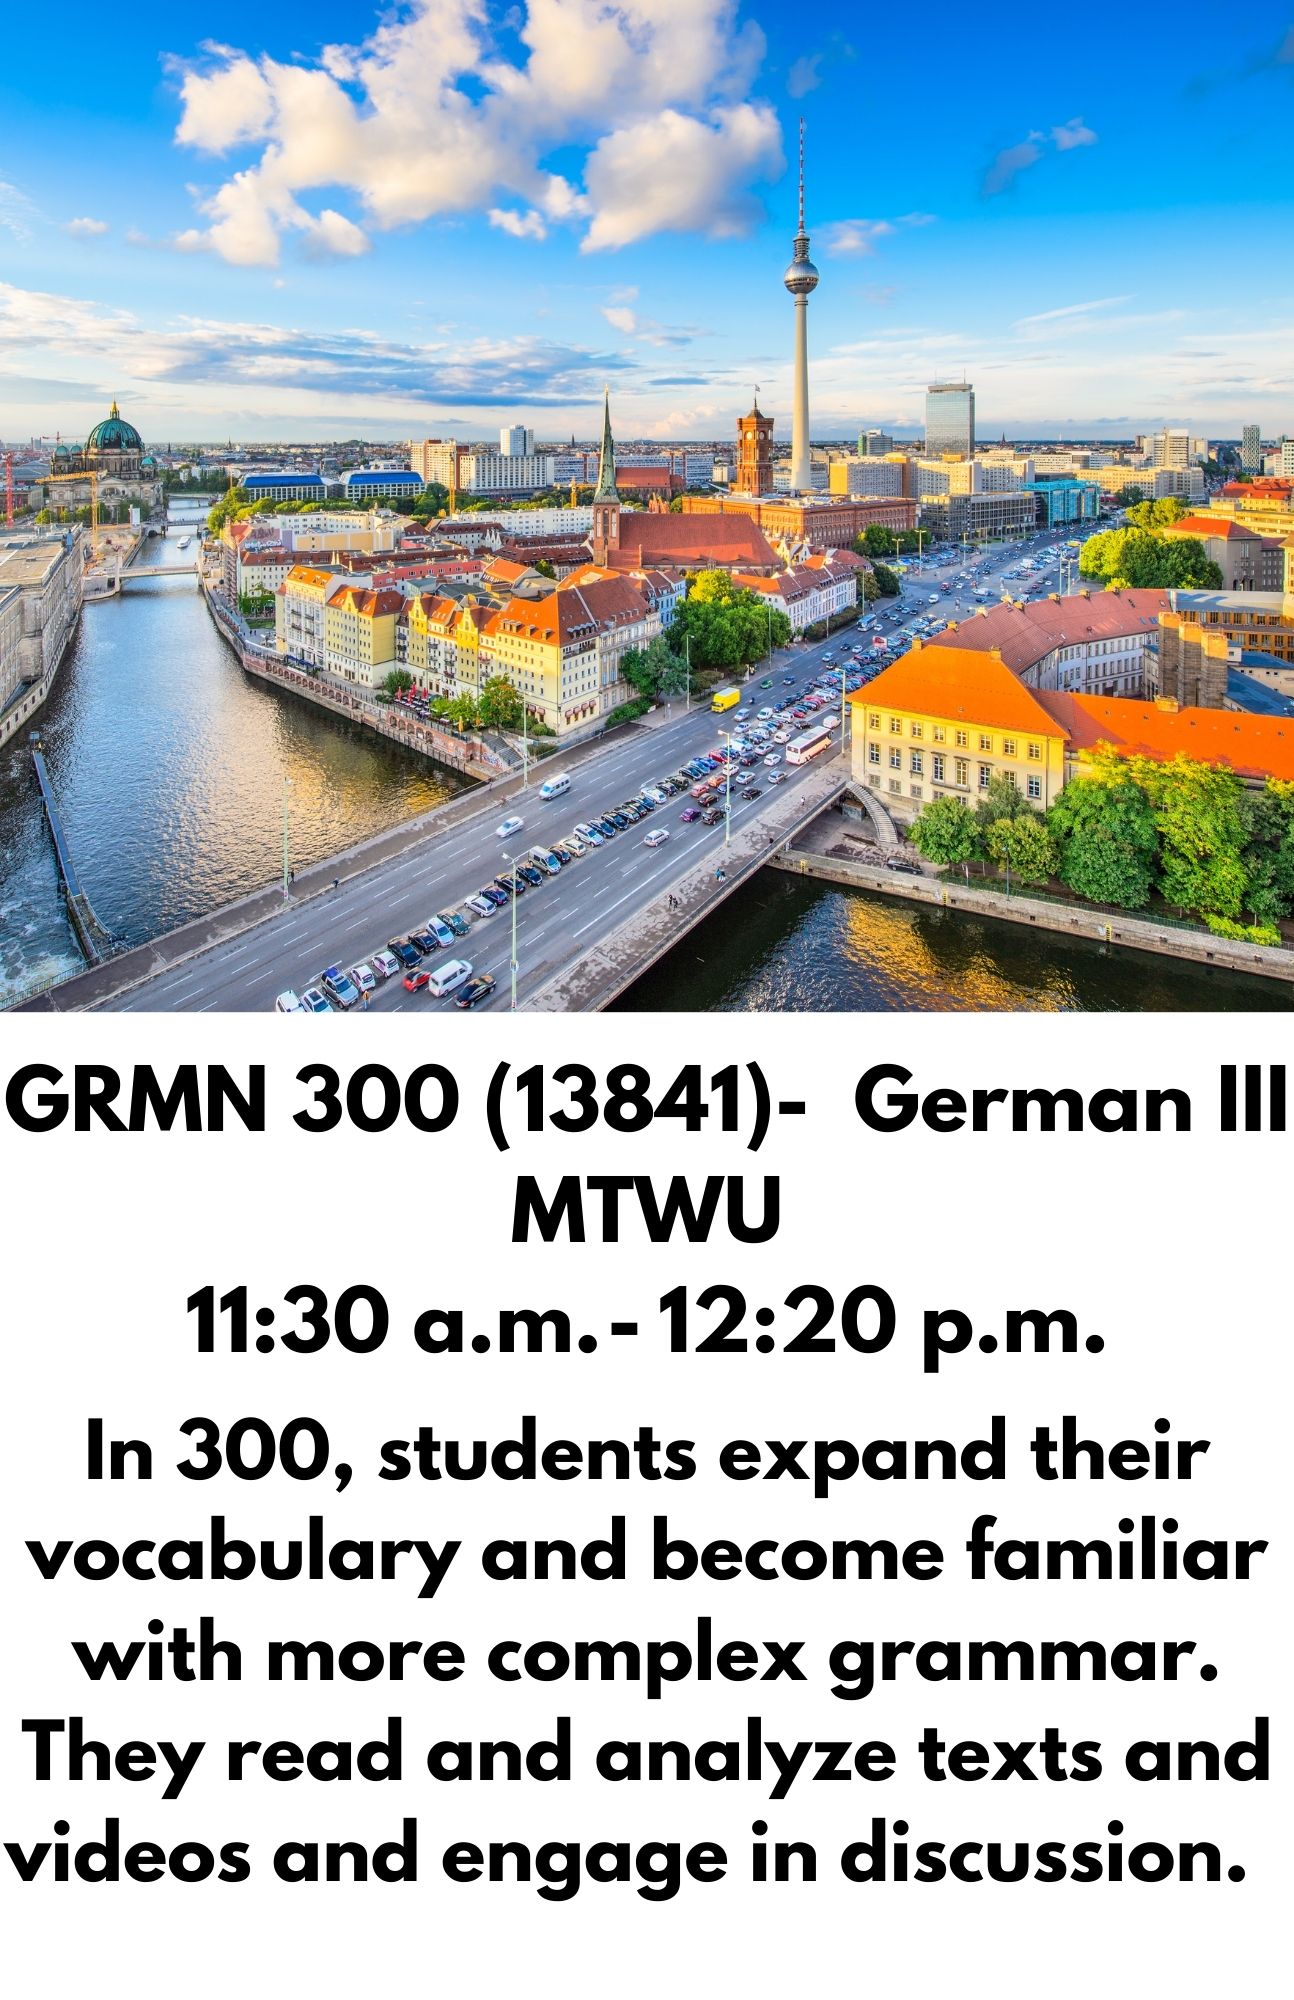 GRMN 300 (13841)-  German III MTWU 11:30 a.m. - 12:20 p.m. In 300, students expand their vocabulary and become familiar with more complex grammar. They read and analyze texts and videos and engage in discussion.